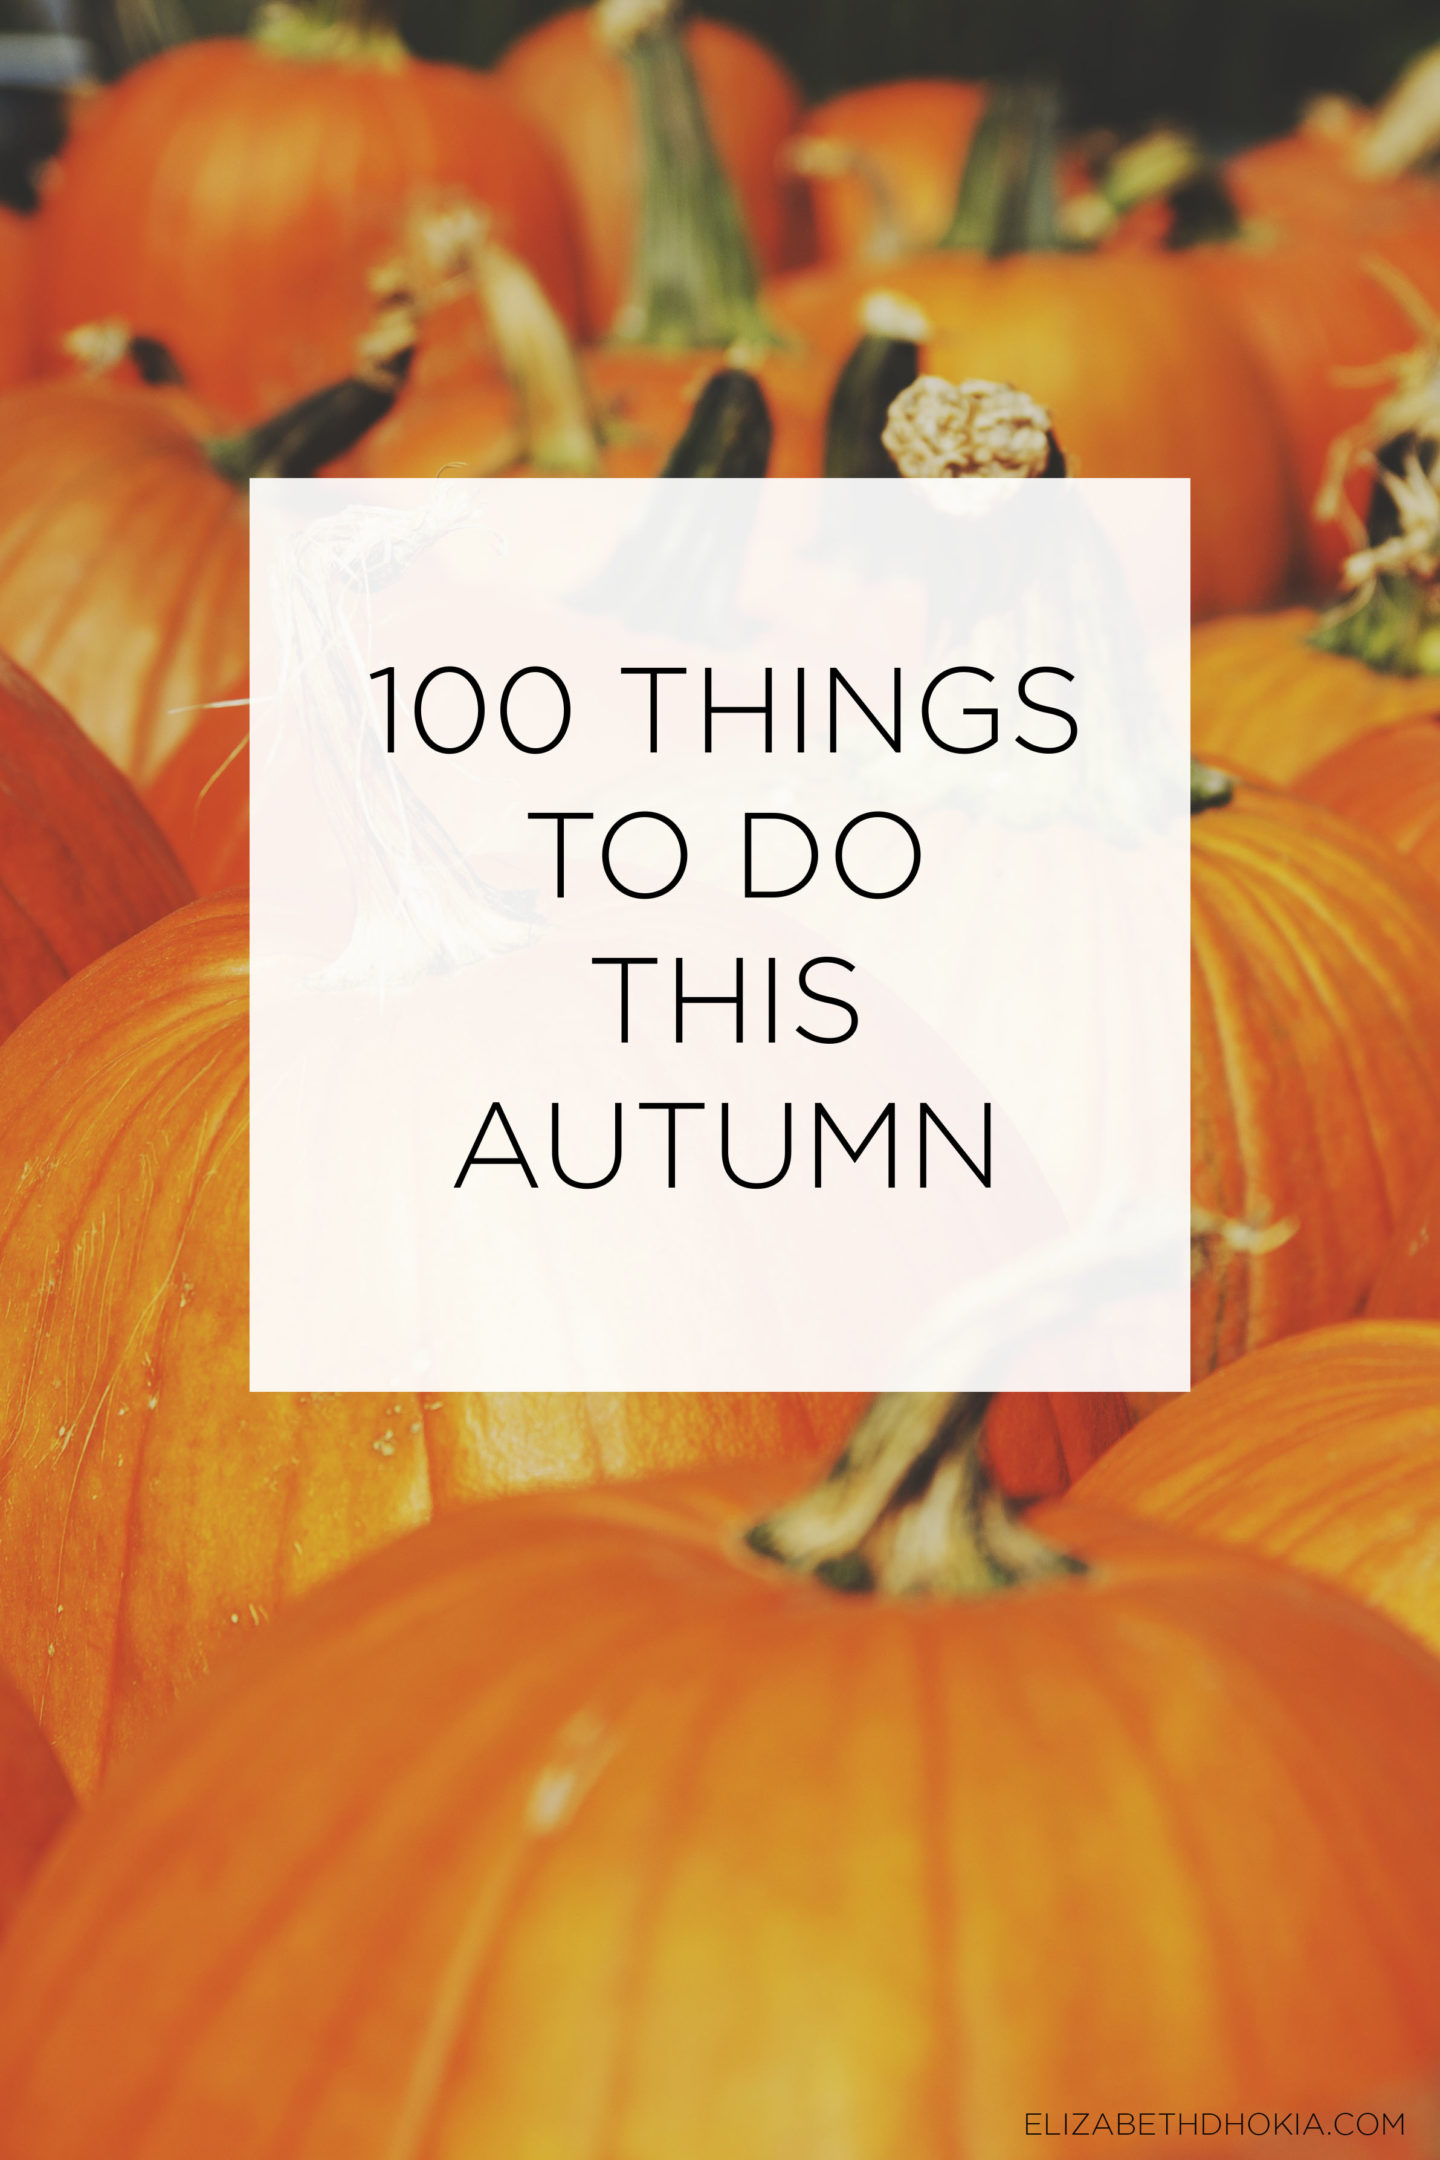 Rows of pumpkins and a caption saying 100 Things To Do This Autumn